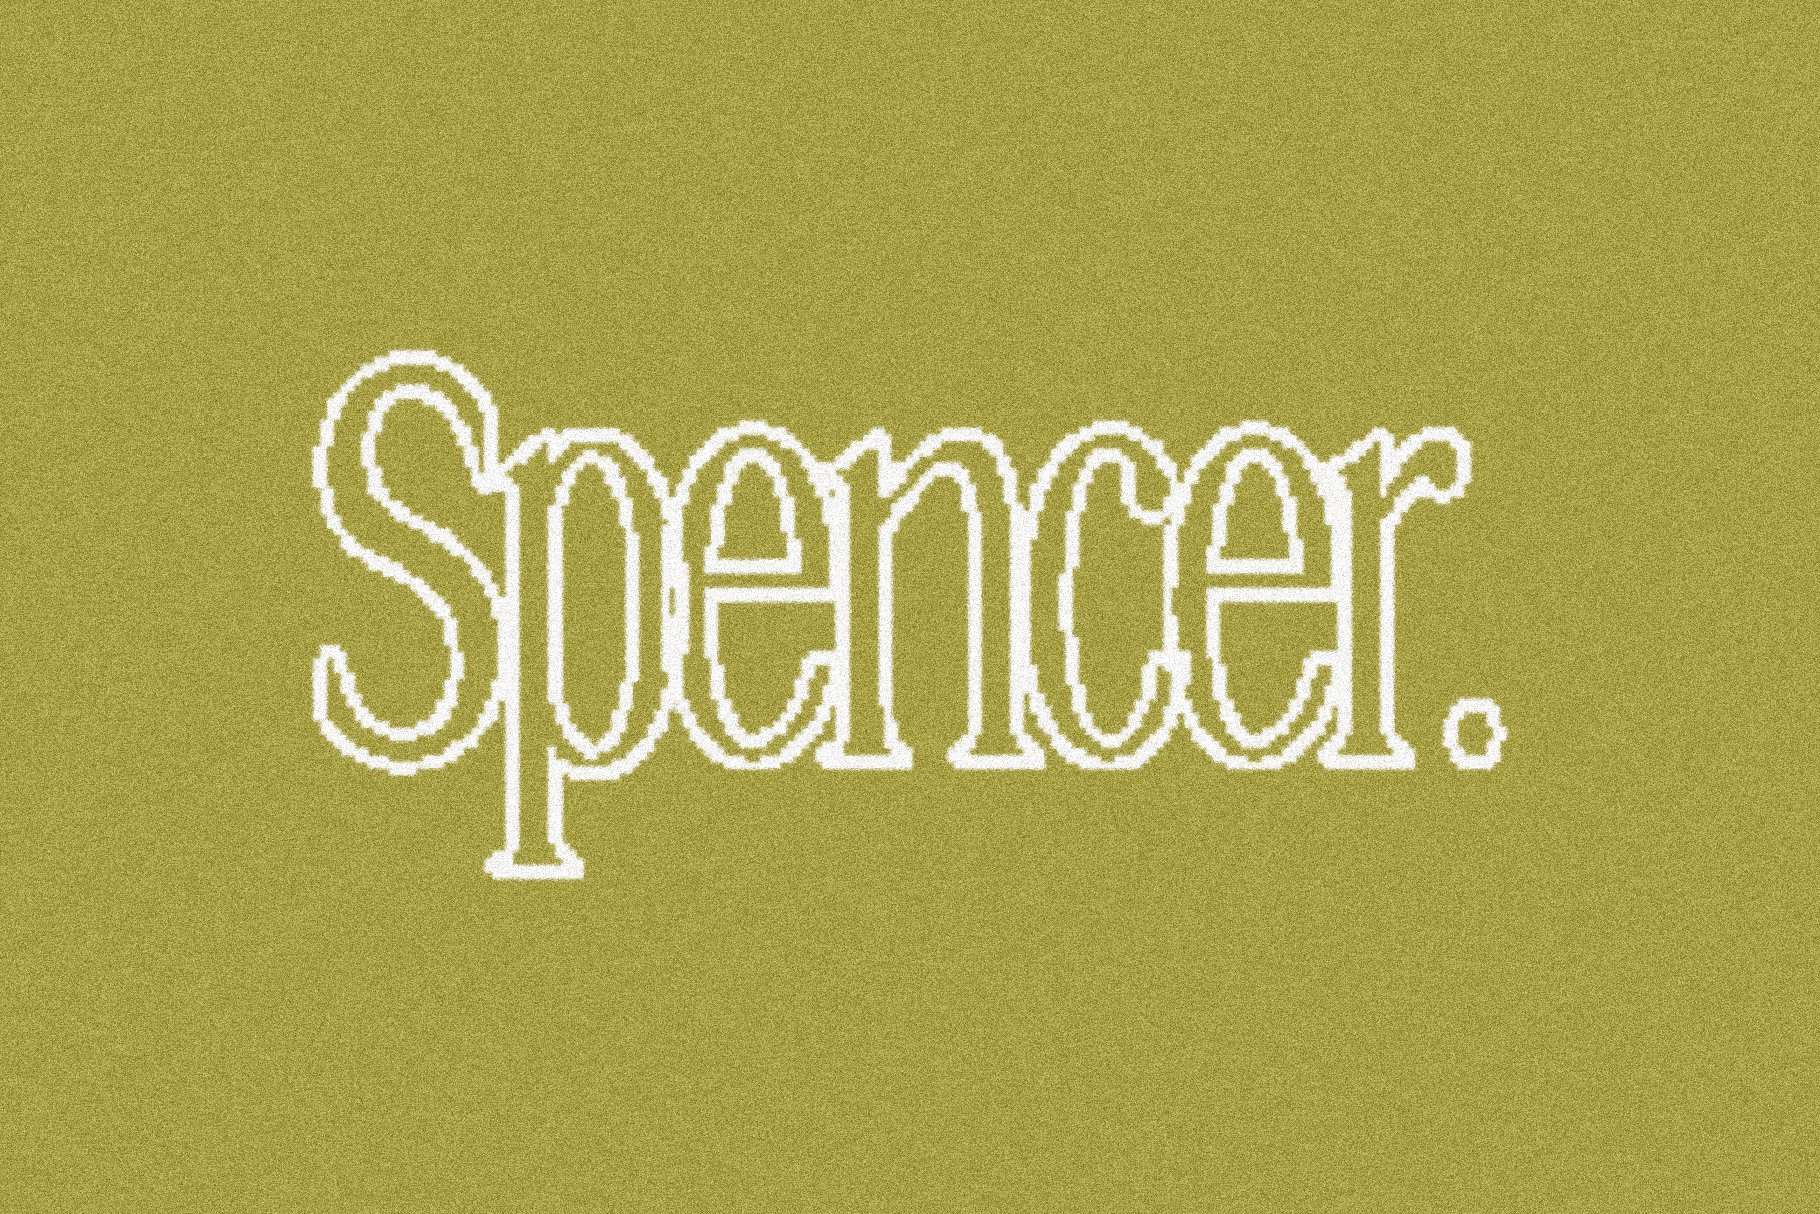 The word spencer written in white on a green background.